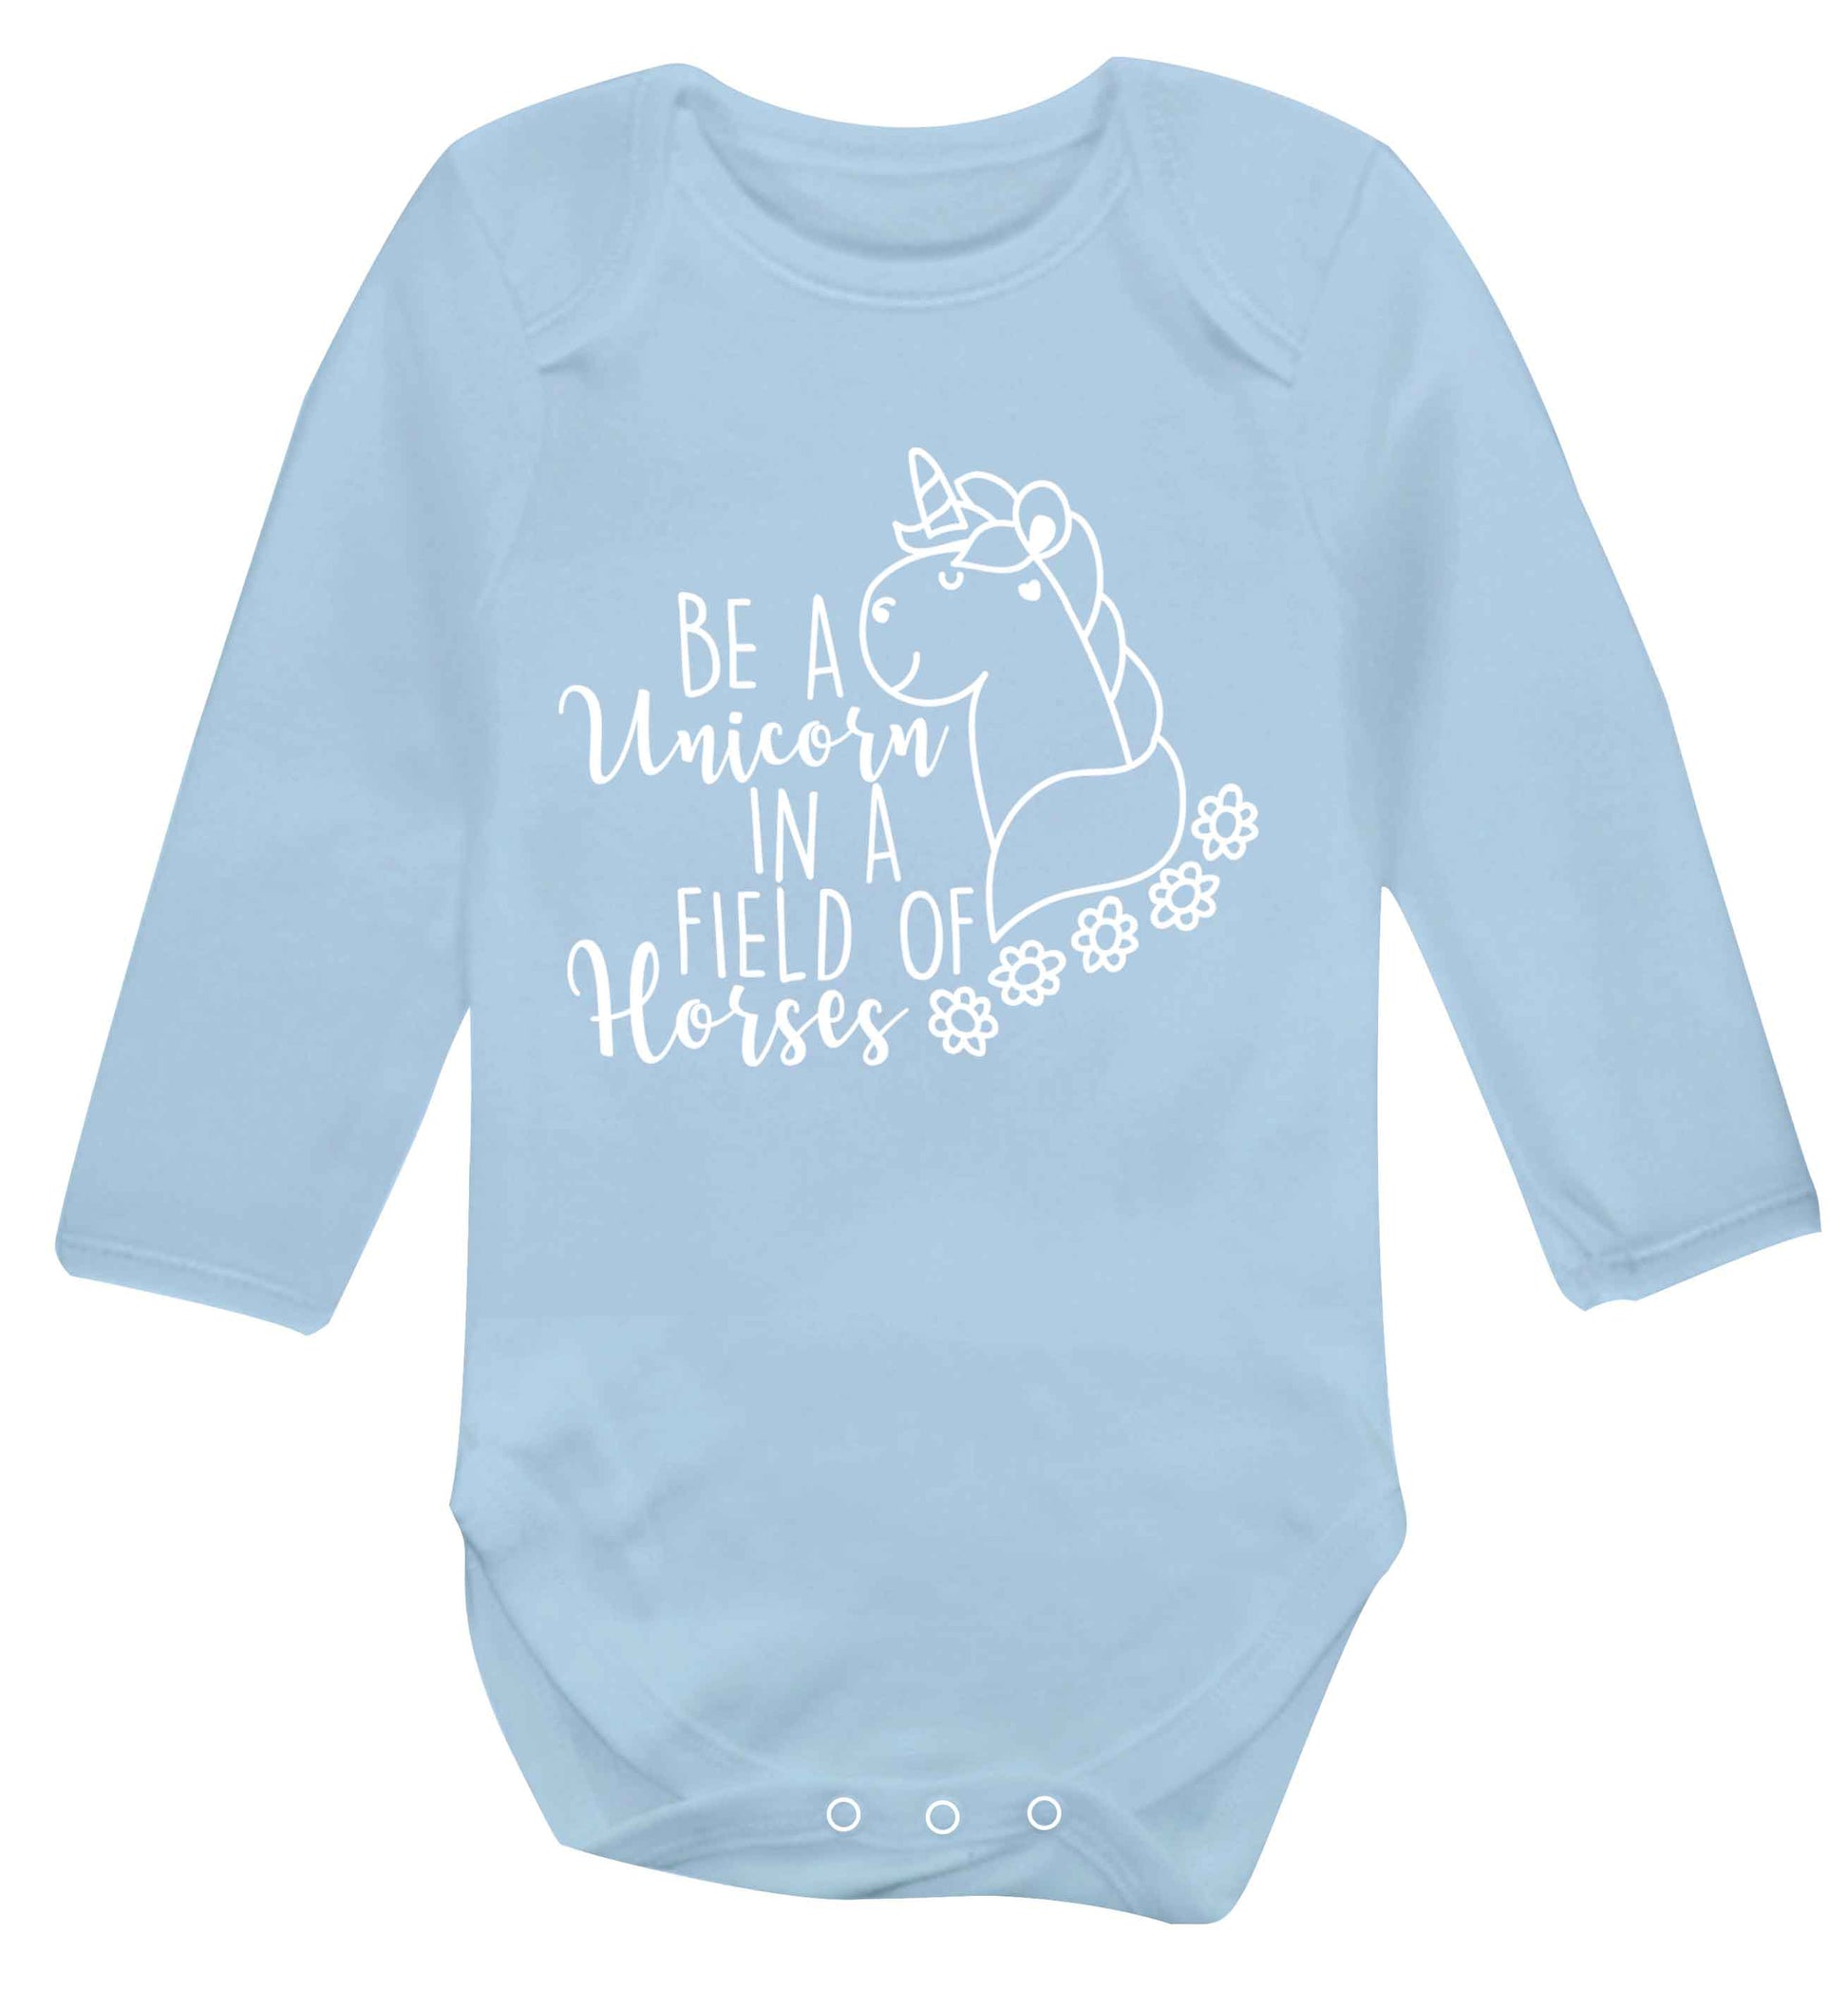 Be a unicorn in a field of horses Baby Vest long sleeved pale blue 6-12 months